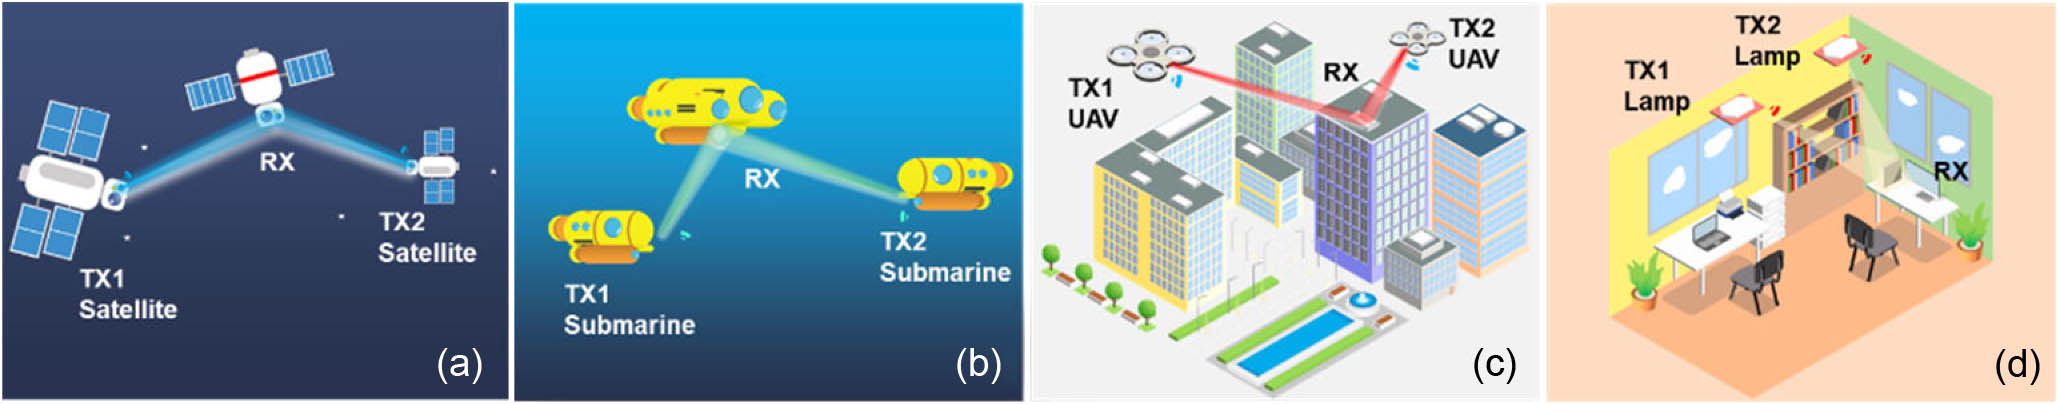 Illustrations of the potential scenarios of superposed modulation in (a) satellite network VLLC, (b) underwater VLLC, (c) UAV and terrestrial VLLC, and (d) indoor VLLC.